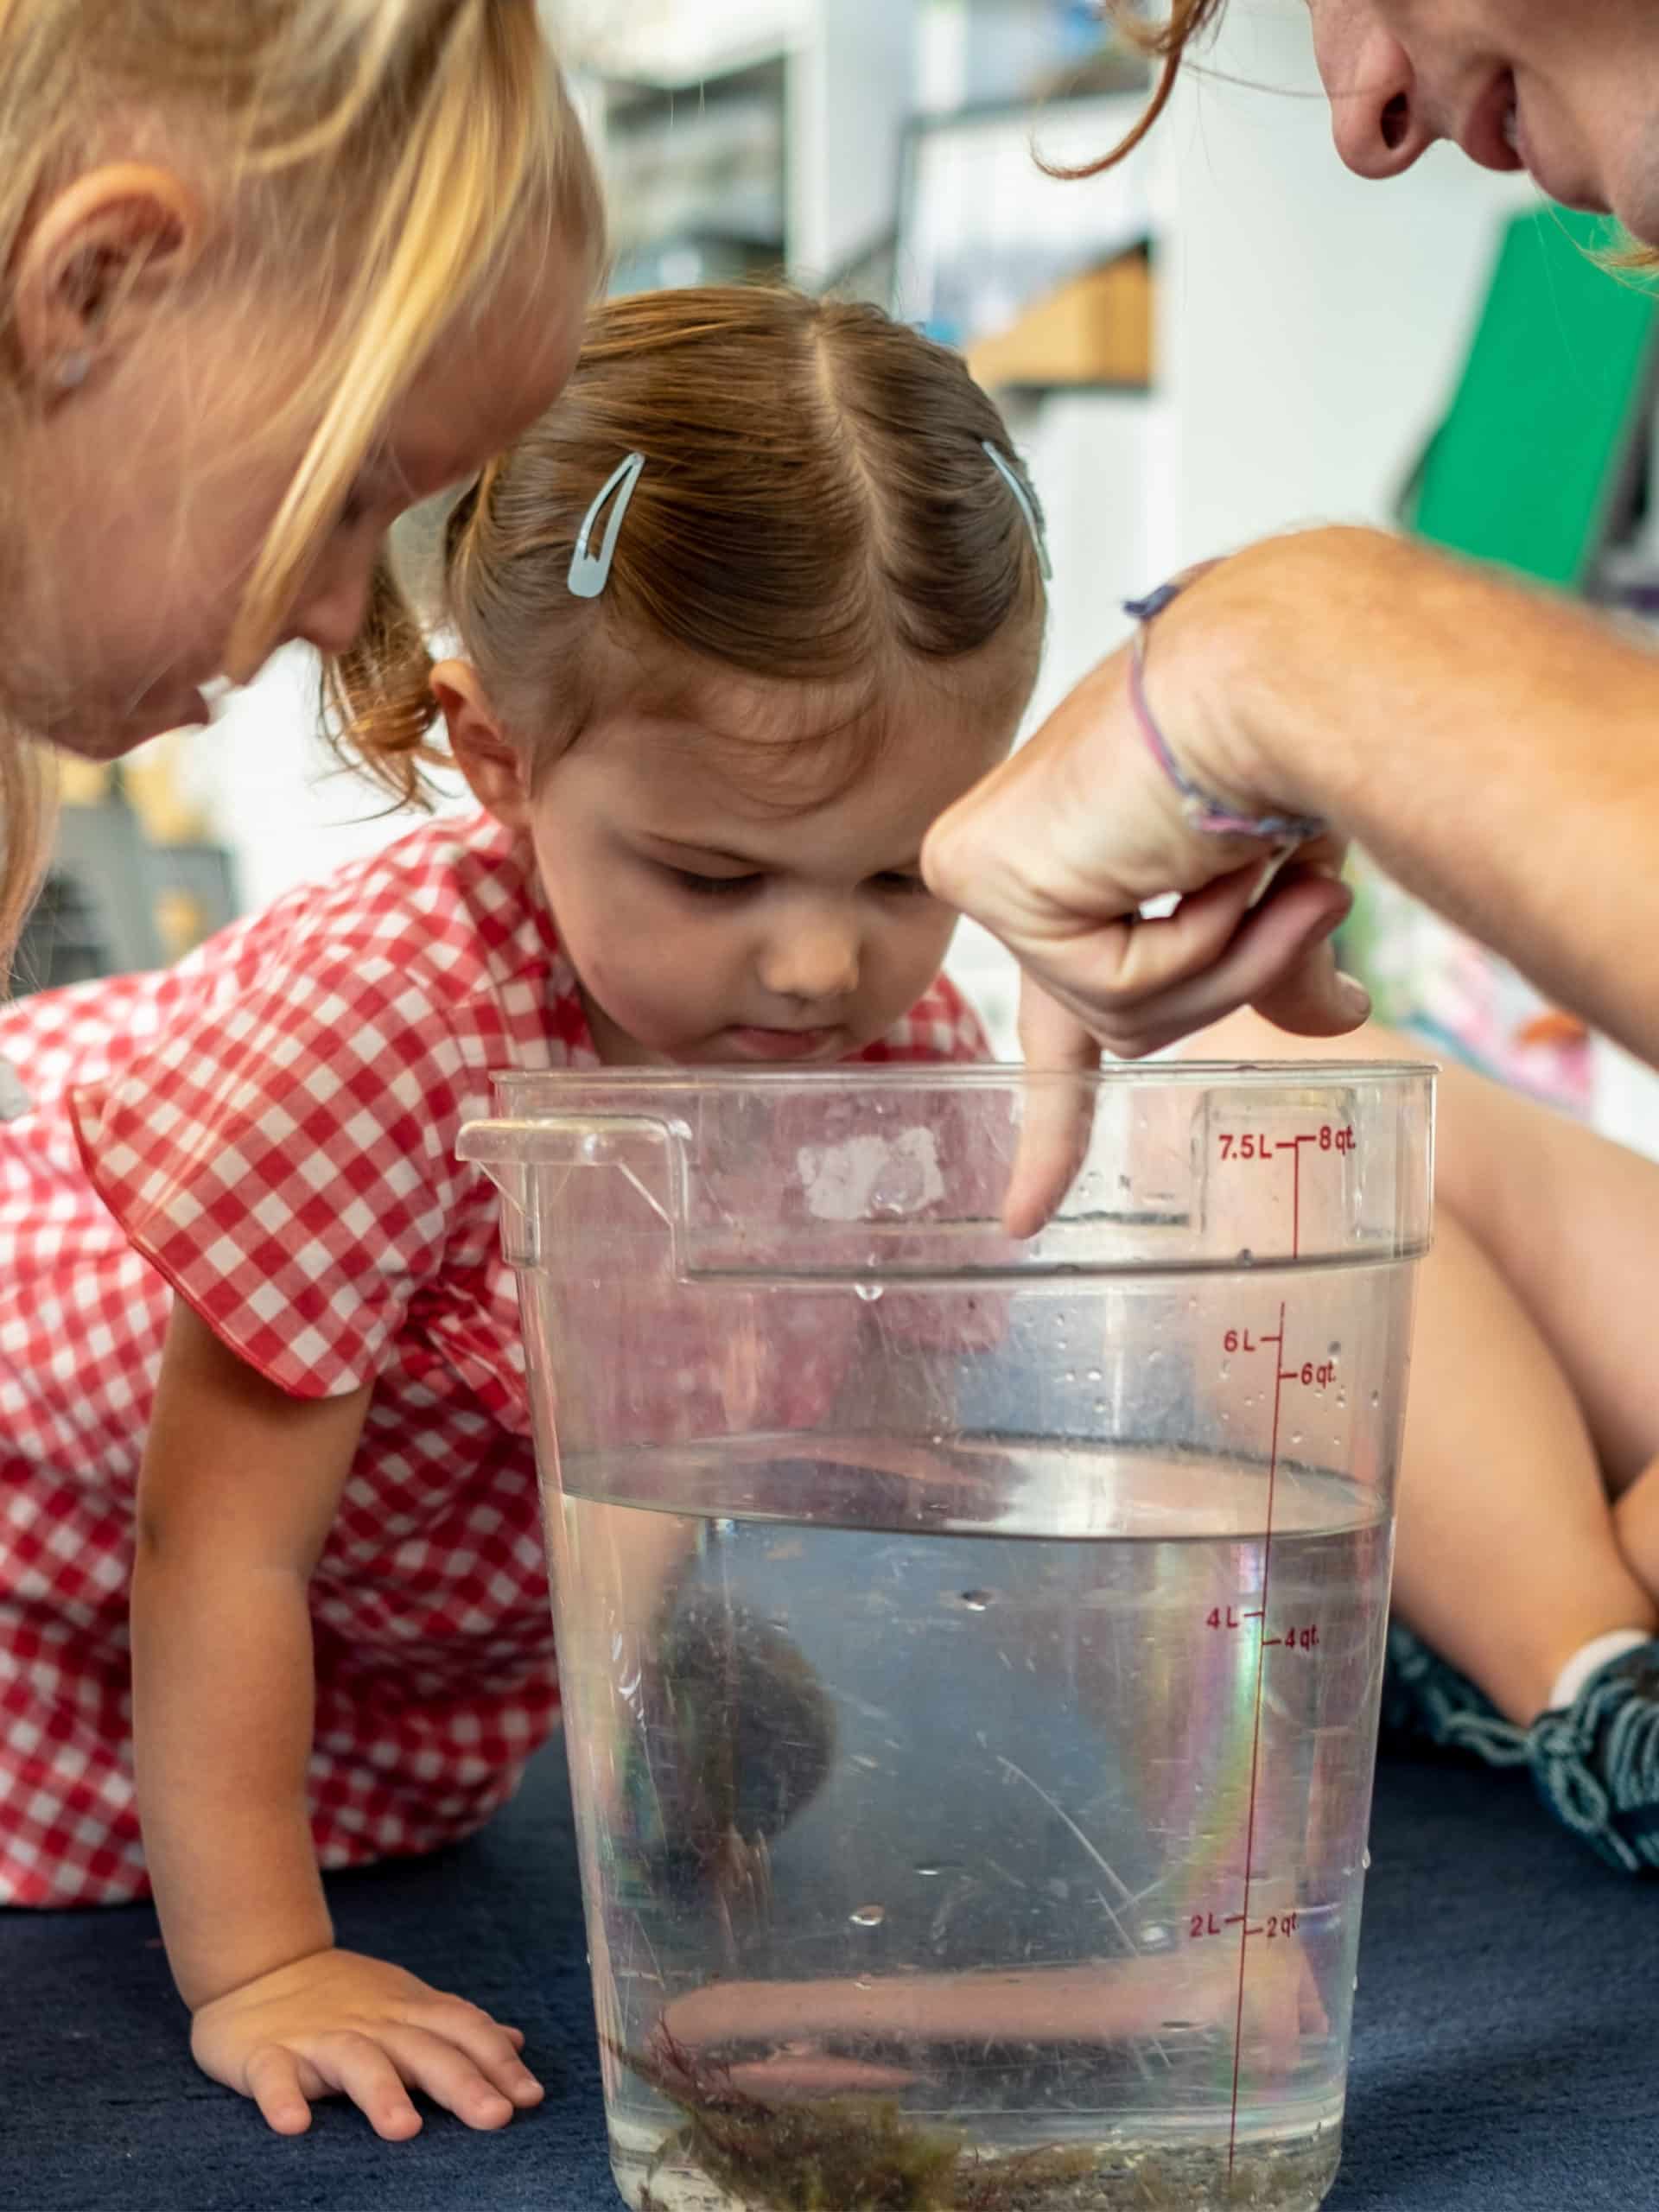 Instructor pointing into a bucket with a crab with small children looking.